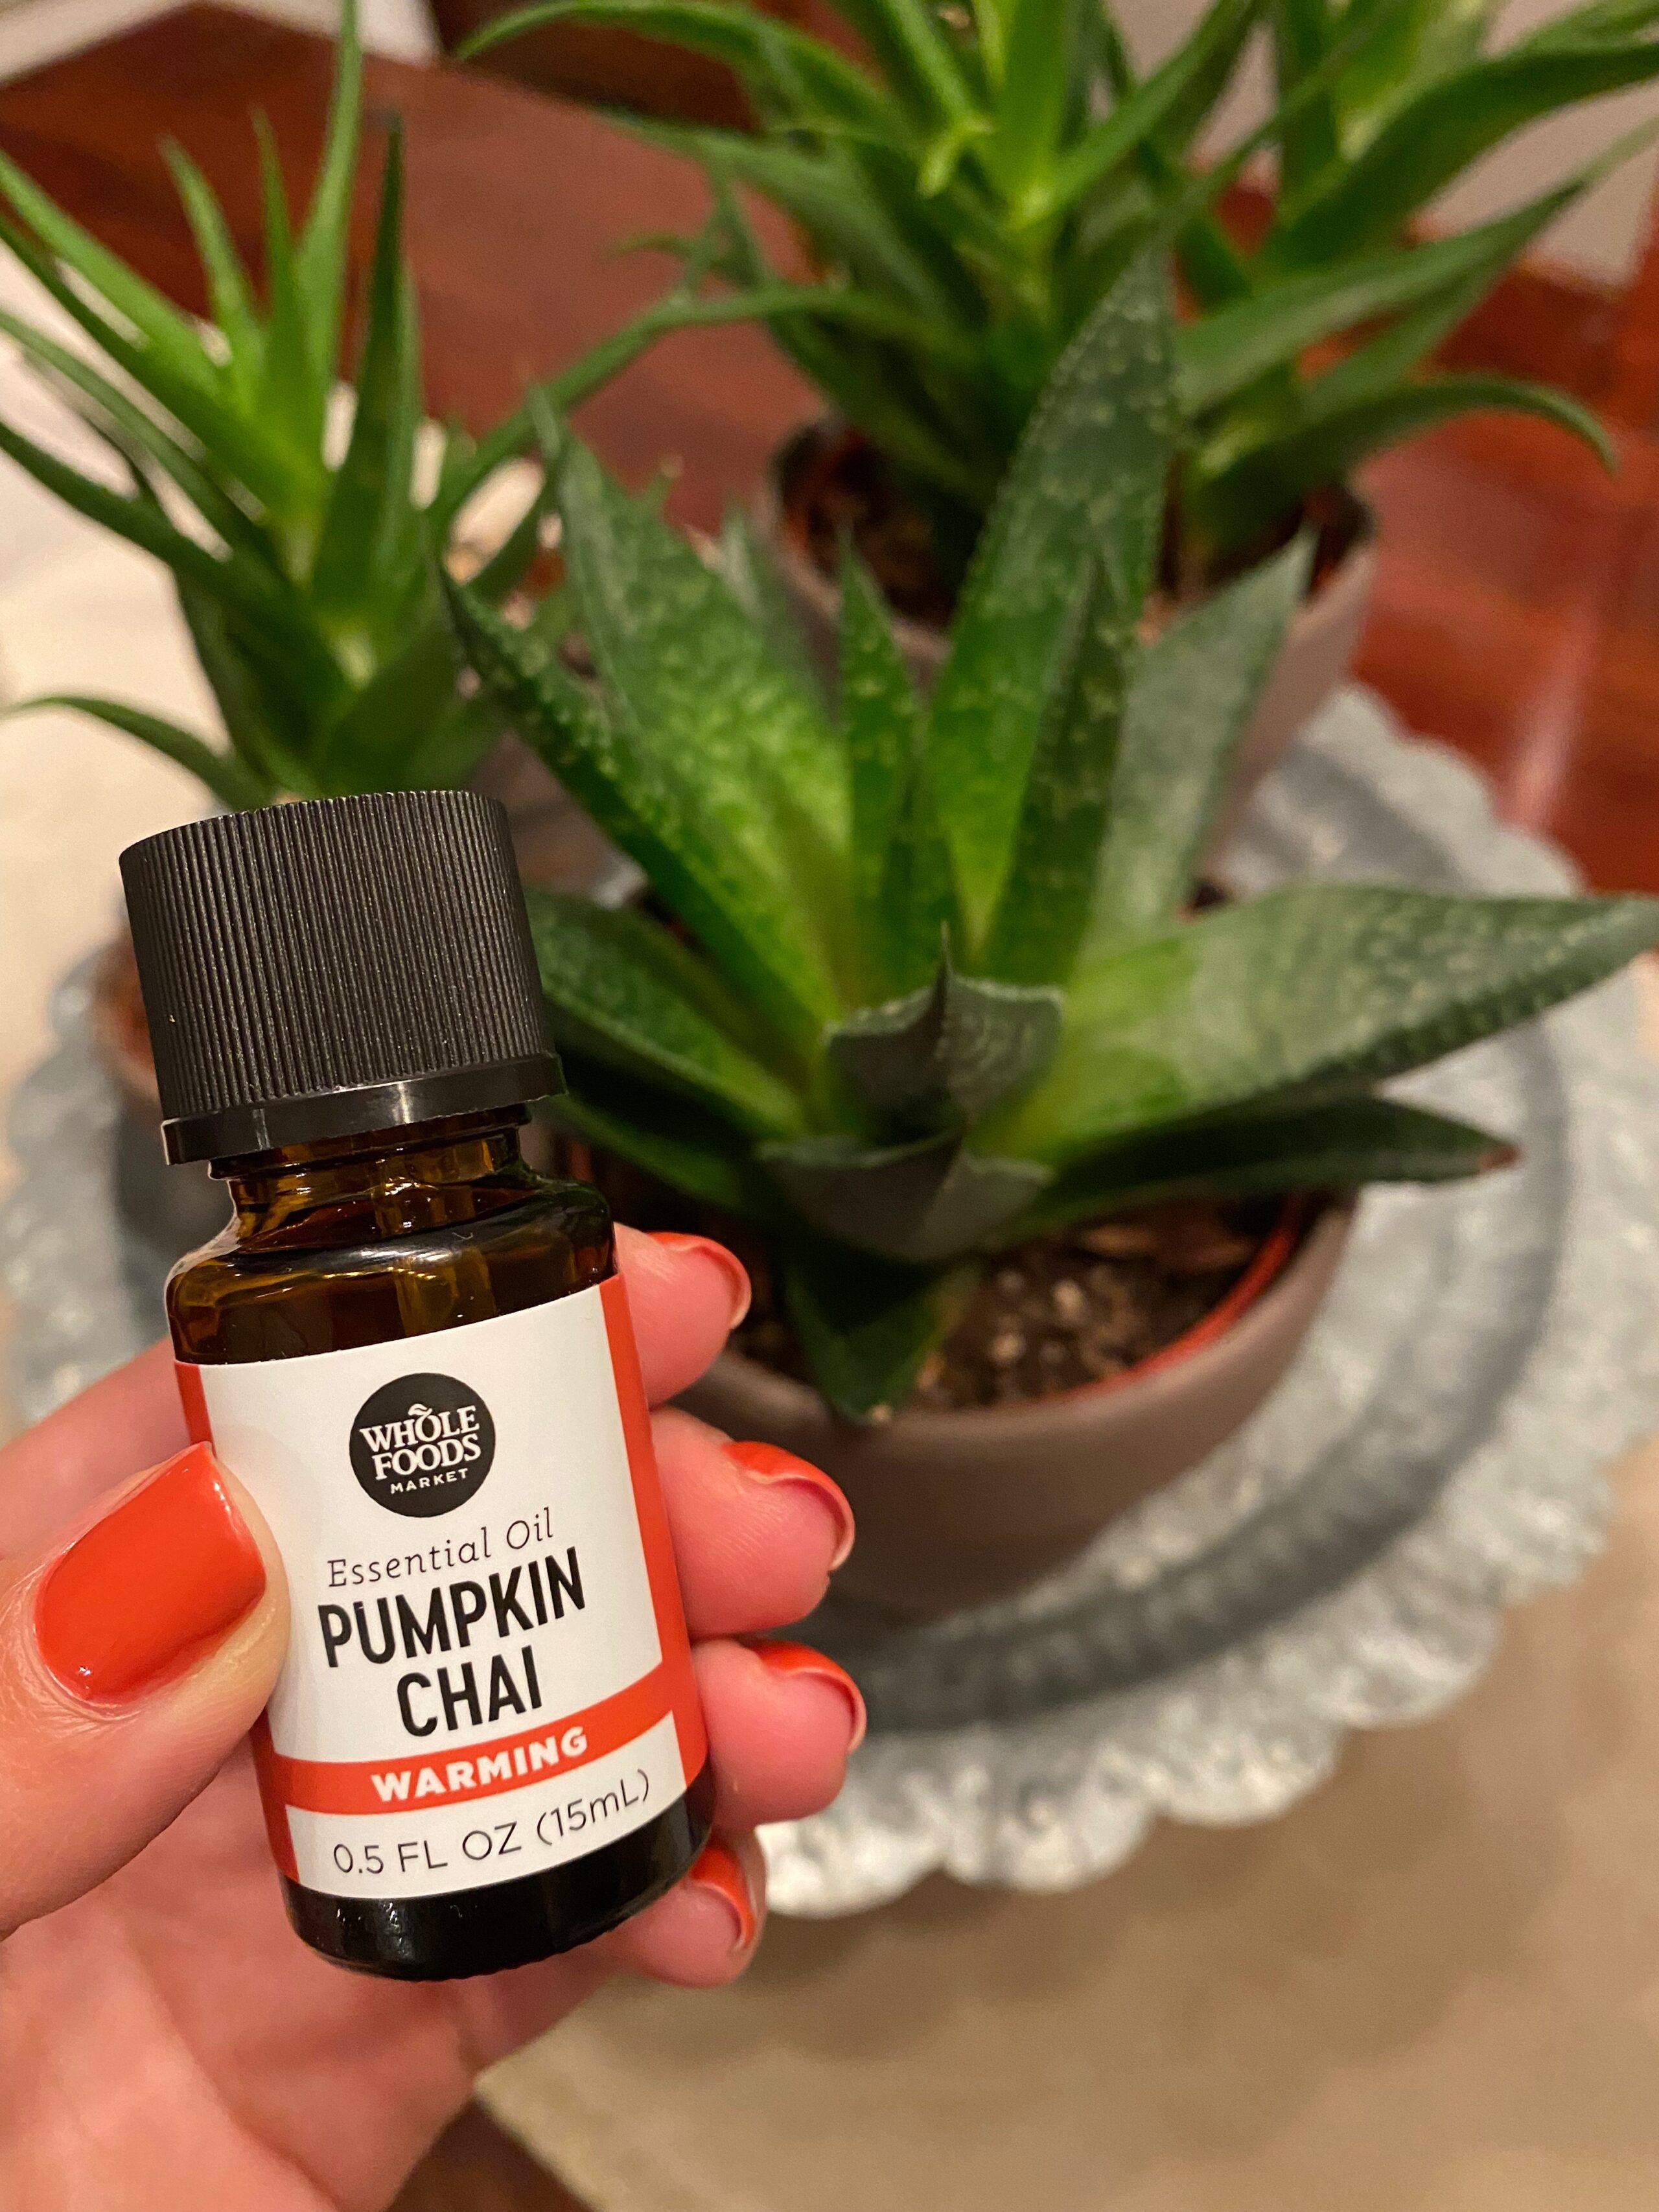 Whole Foods essential oil